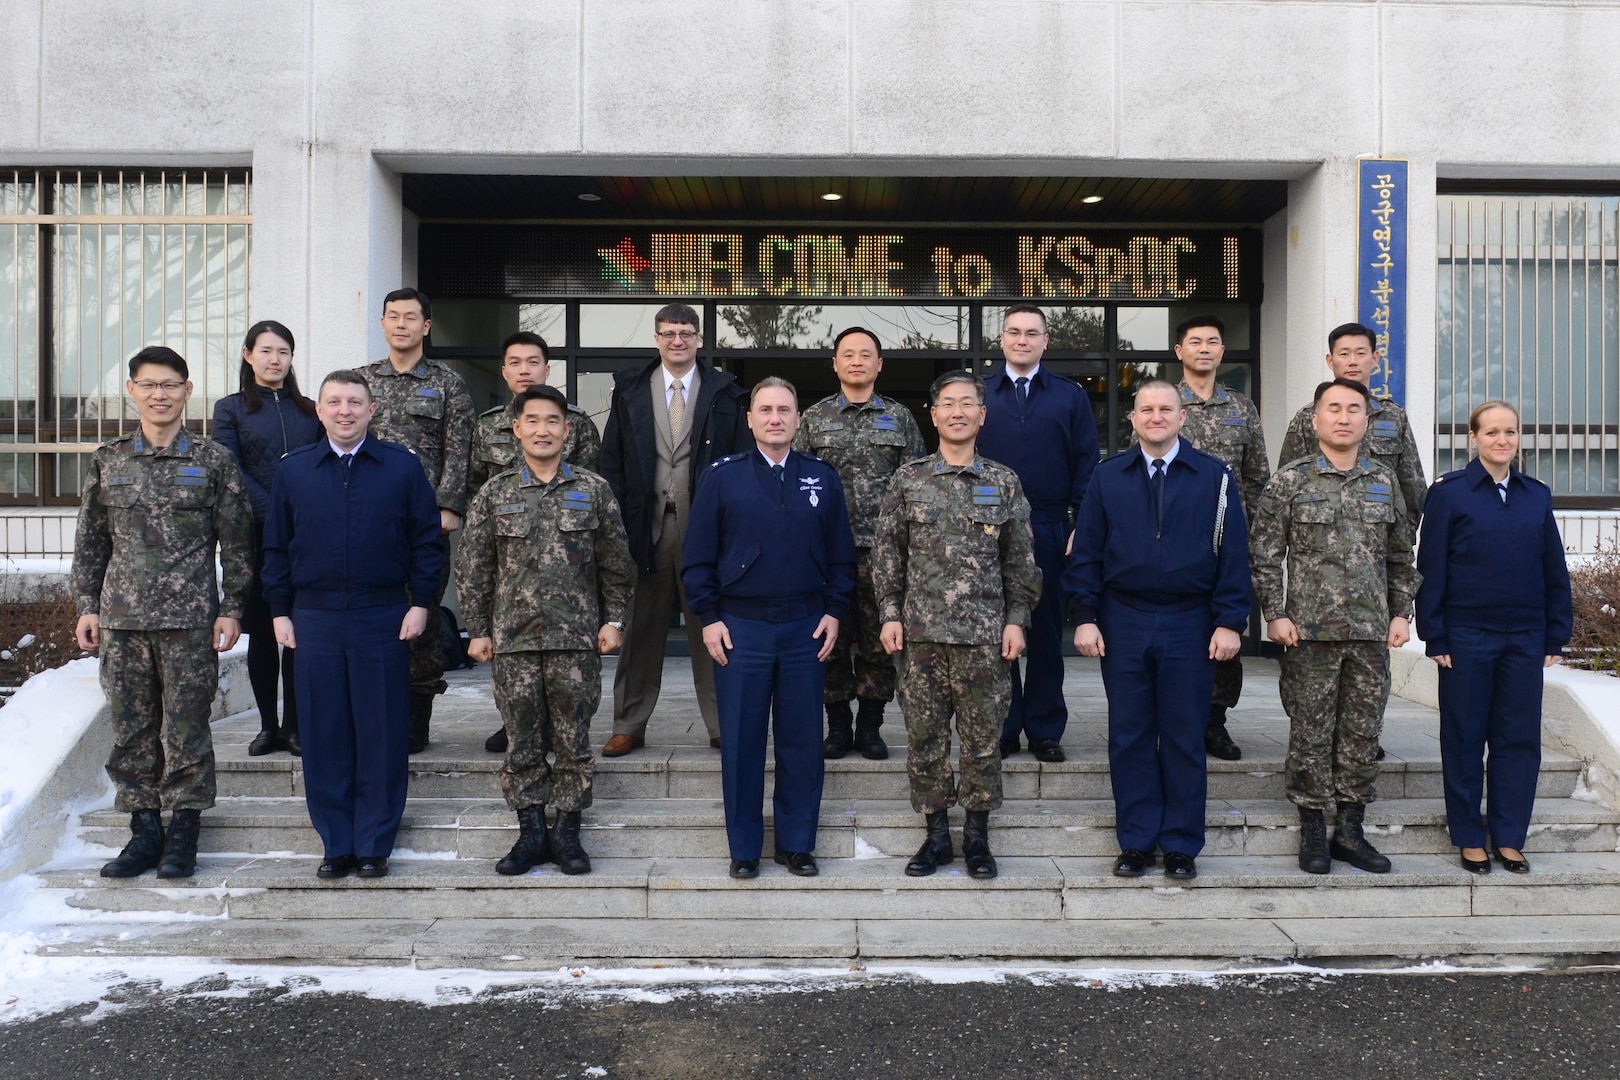 U.S. Air Force Maj. Gen. Clinton Crosier (front row, fourth from left), U.S. Strategic Command plans and policy director, and Republic of Korea Air Force (ROKAF) Brig. Gen. Dongkyu Lee (front row, fourth from right), studies and analyses assessments wing commander, visit the Korean Space Operations Center (KSpOC) in Gyeryong-Si, Republic of Korea (ROK), Jan. 20, 2017. Crosier visited the KSpOC and the ROKAF Headquarters to meet with ROKAF leaders and discuss U.S.-ROK military collaboration in space. One of nine DoD unified combatant commands, USSTRATCOM has global strategic missions assigned through the Unified Command Plan that include strategic deterrence; space operations; cyberspace operations; joint electronic warfare; global strike; missile defense; intelligence, surveillance and reconnaissance; and analysis and targeting.